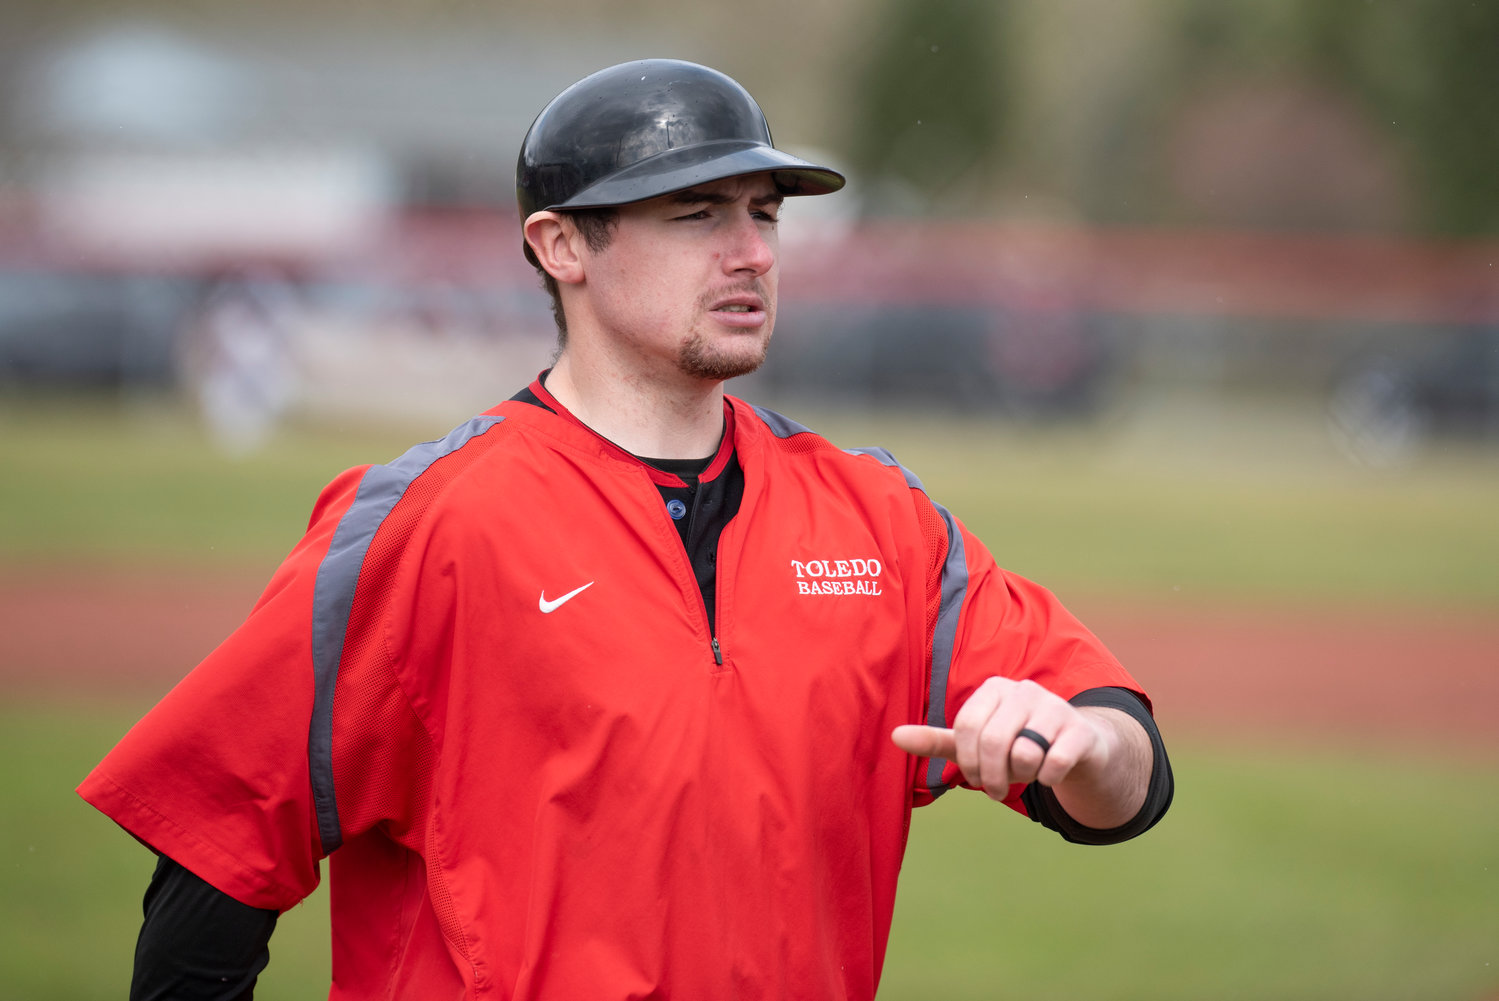 Toledo baseball coach Mack Gaul walks to the dugout during a road game at Tenino on March 16.